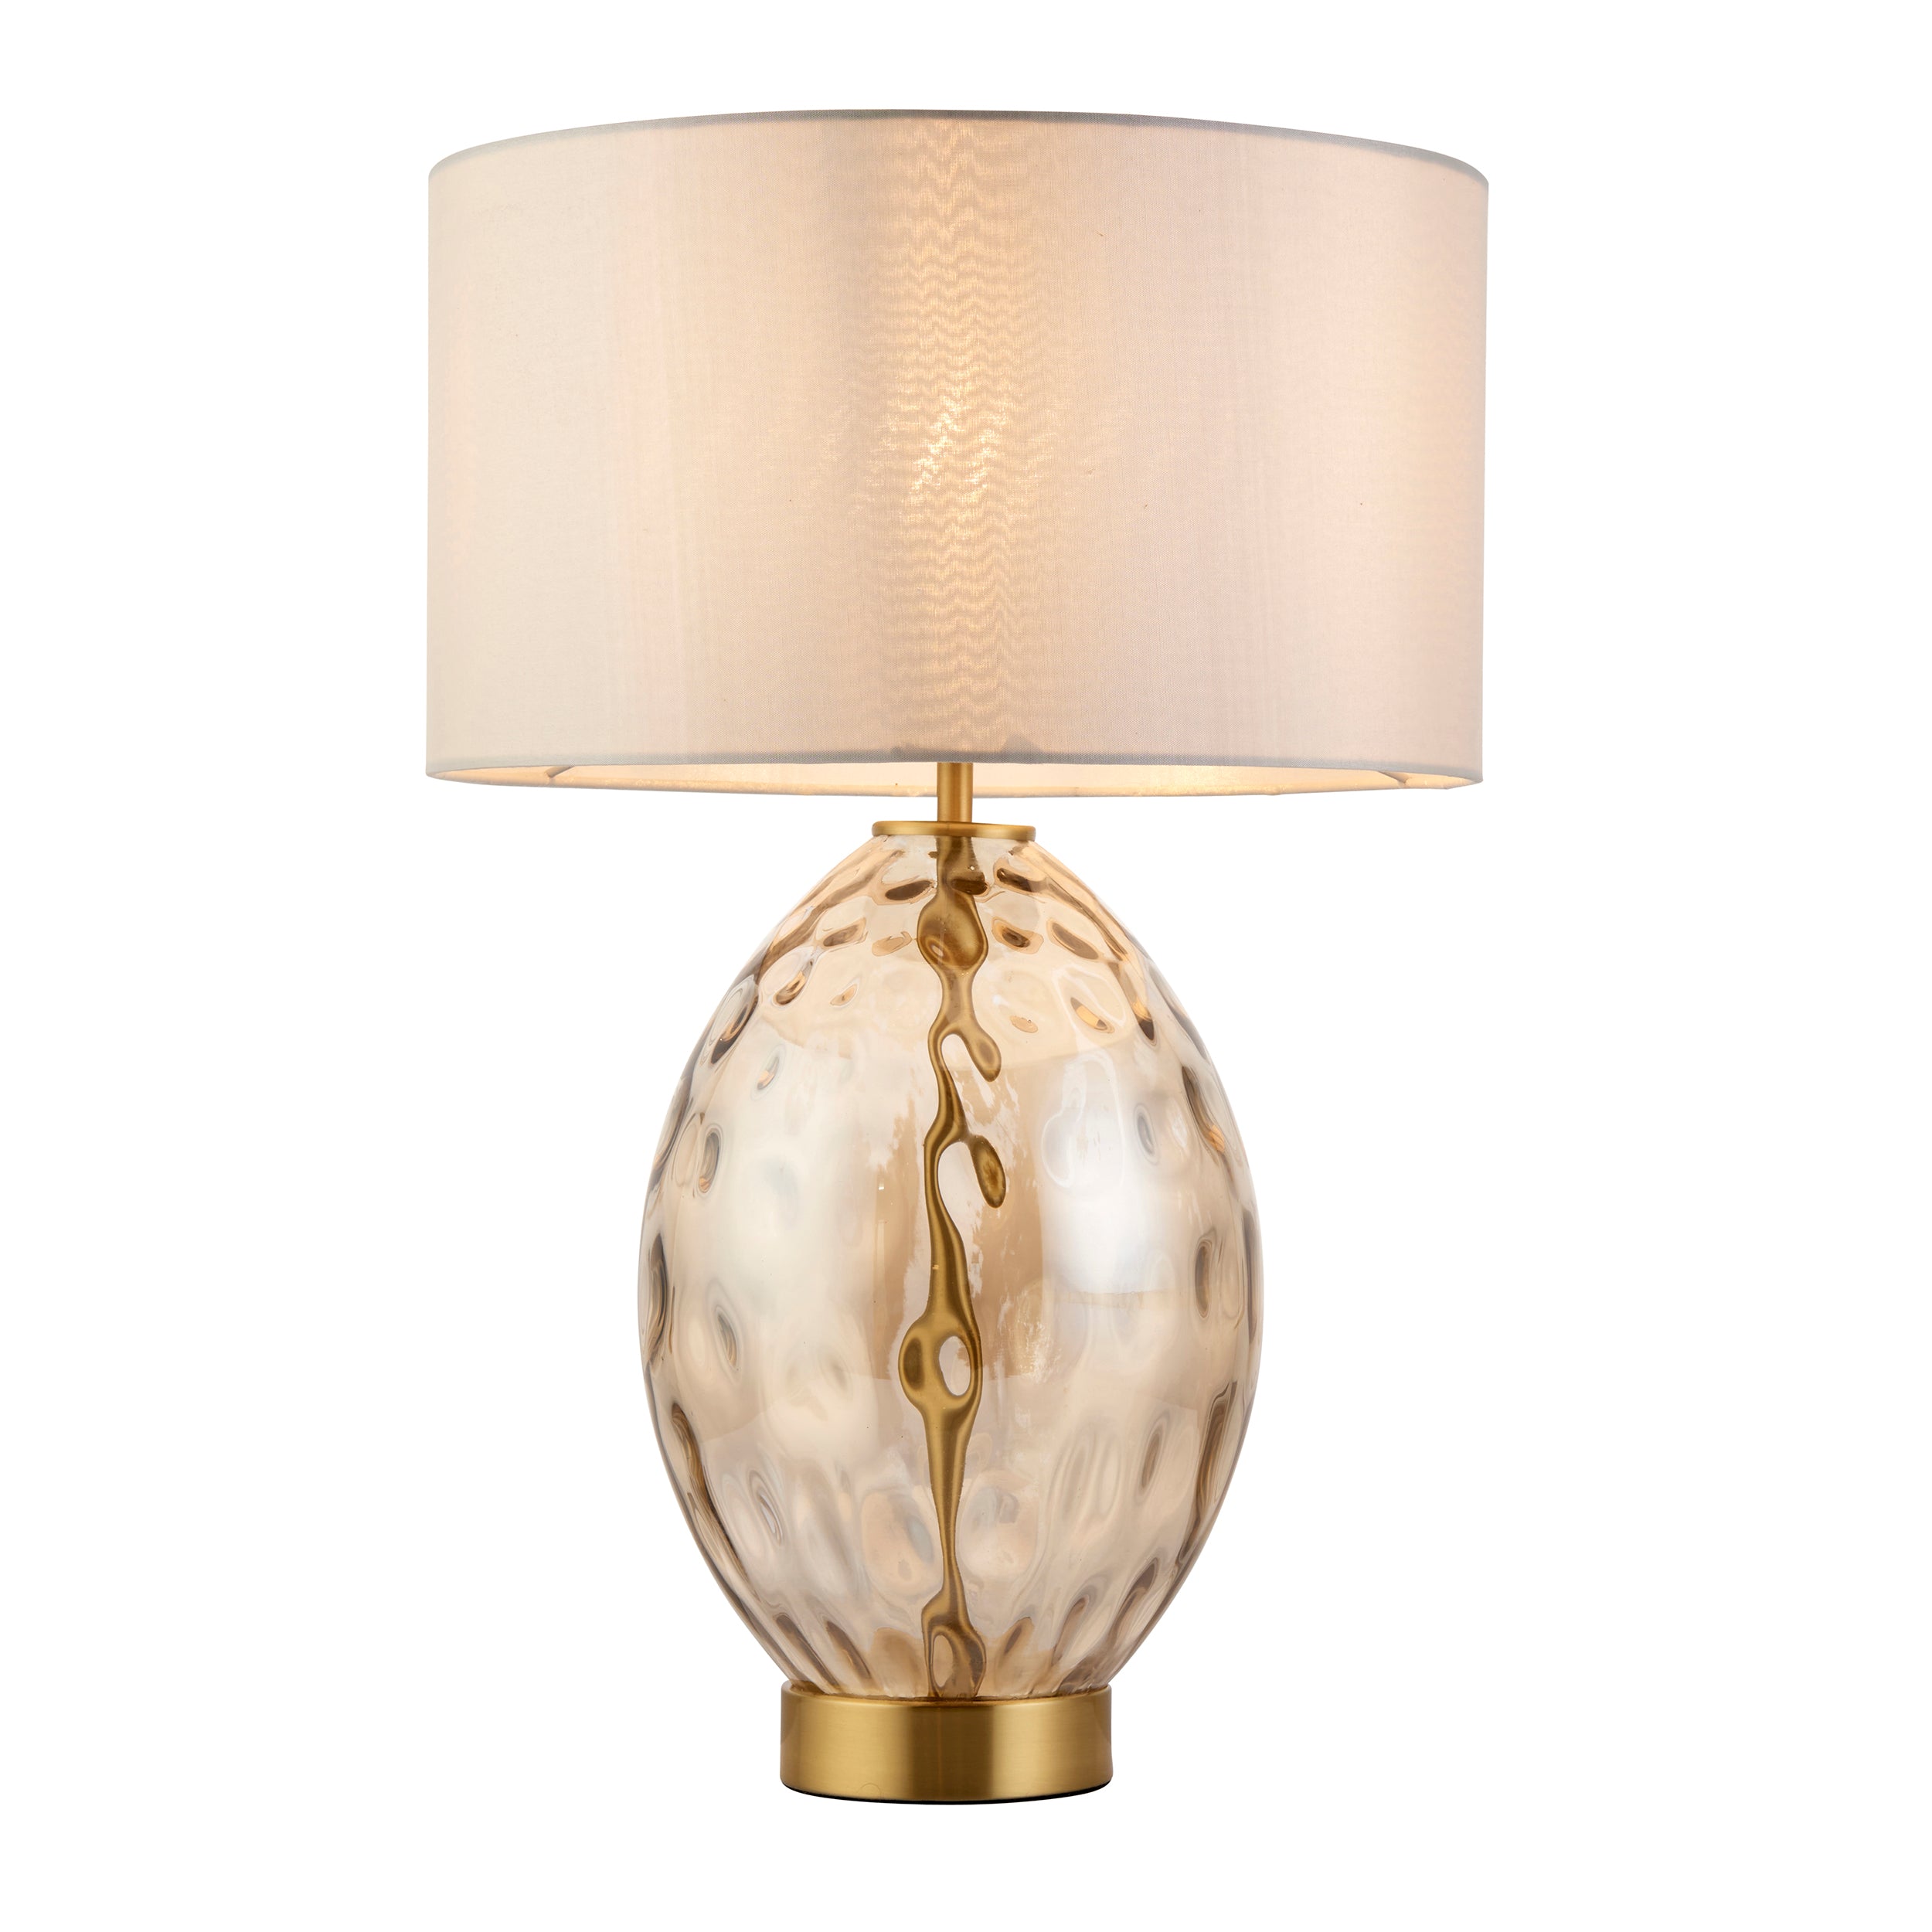 Lightologist Champagne lustre glass, satin brass plate with vintage white fabric Base & shade Table Light